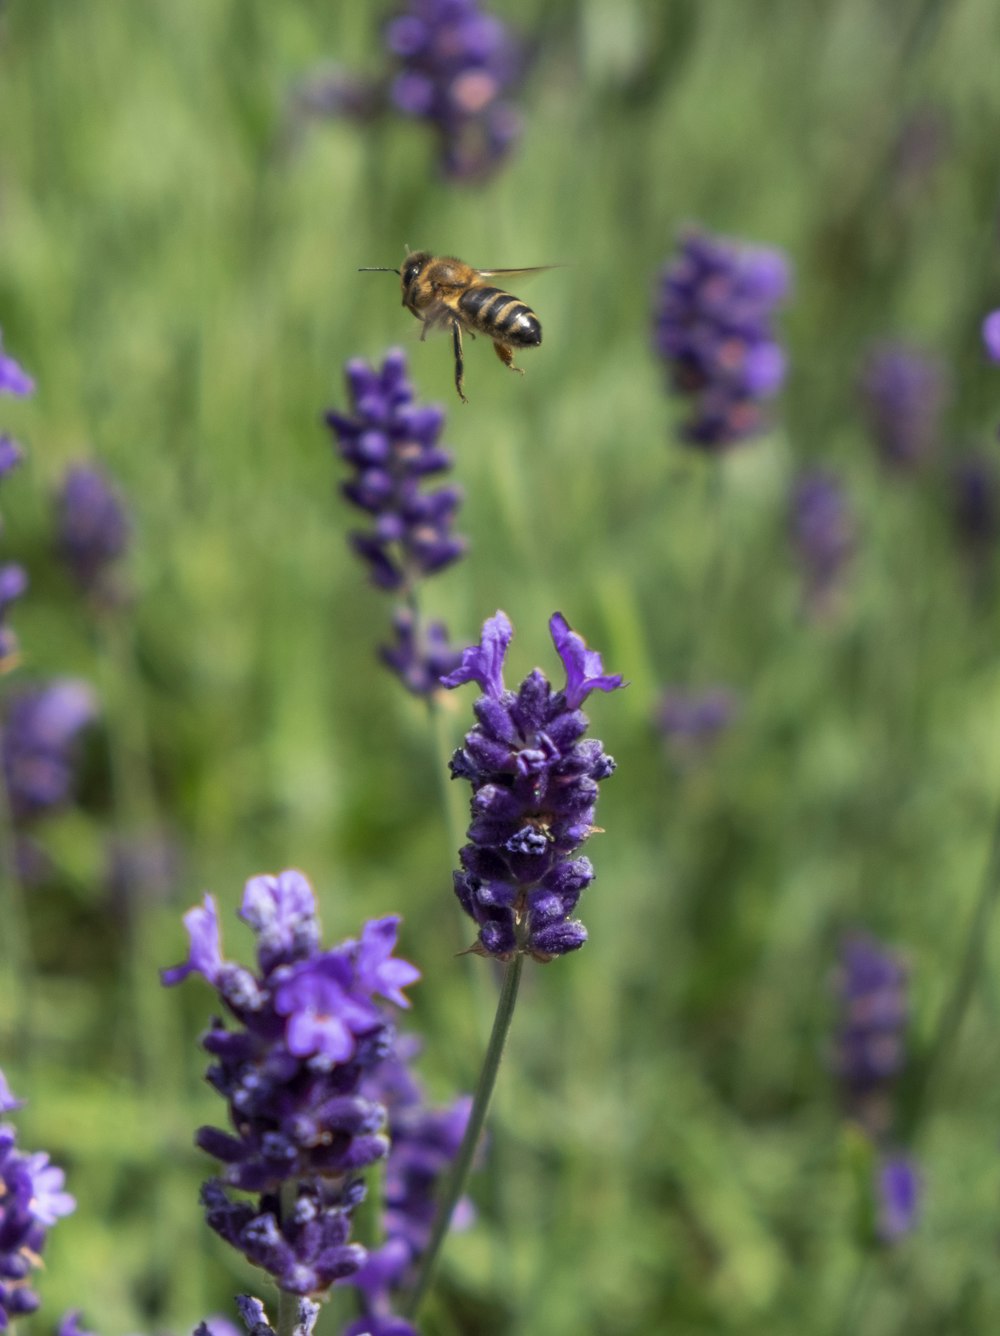 flying wasp surrounded lavender flower